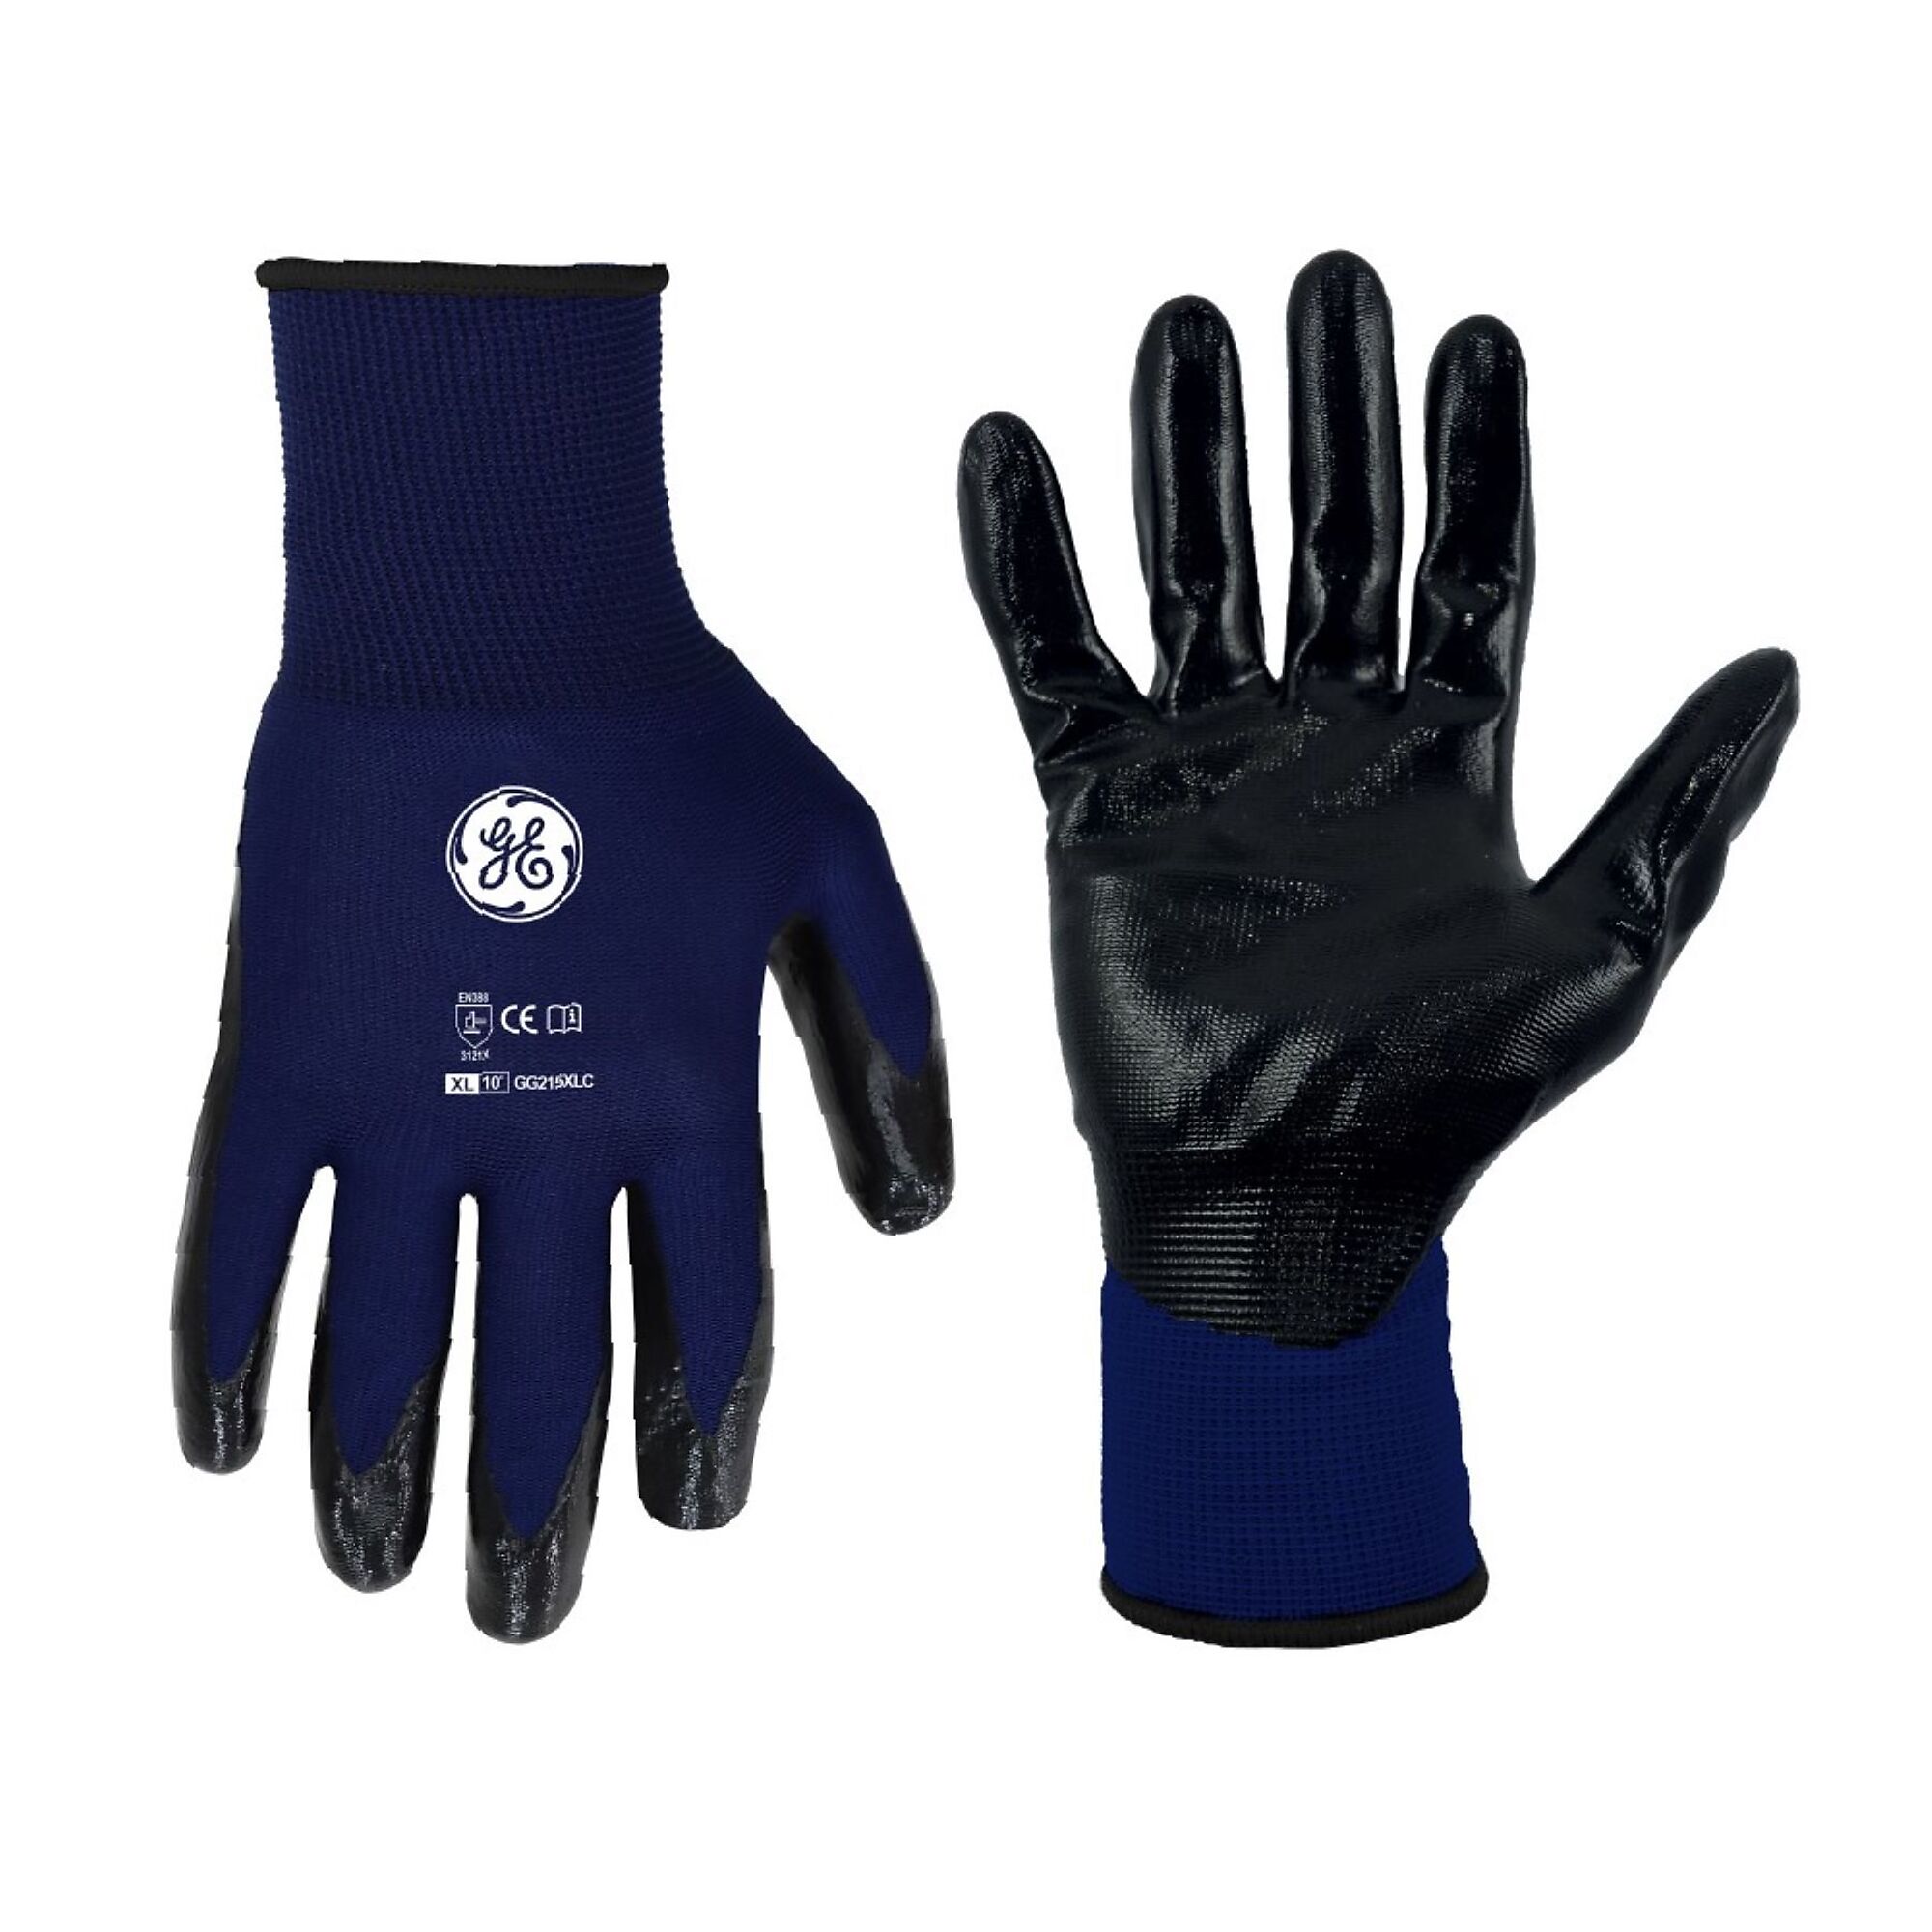 General Electric, Unisex Dipped Gloves Black/Blue XL 12 pair, Size XL, Included (qty.) 12, Model GG215XL